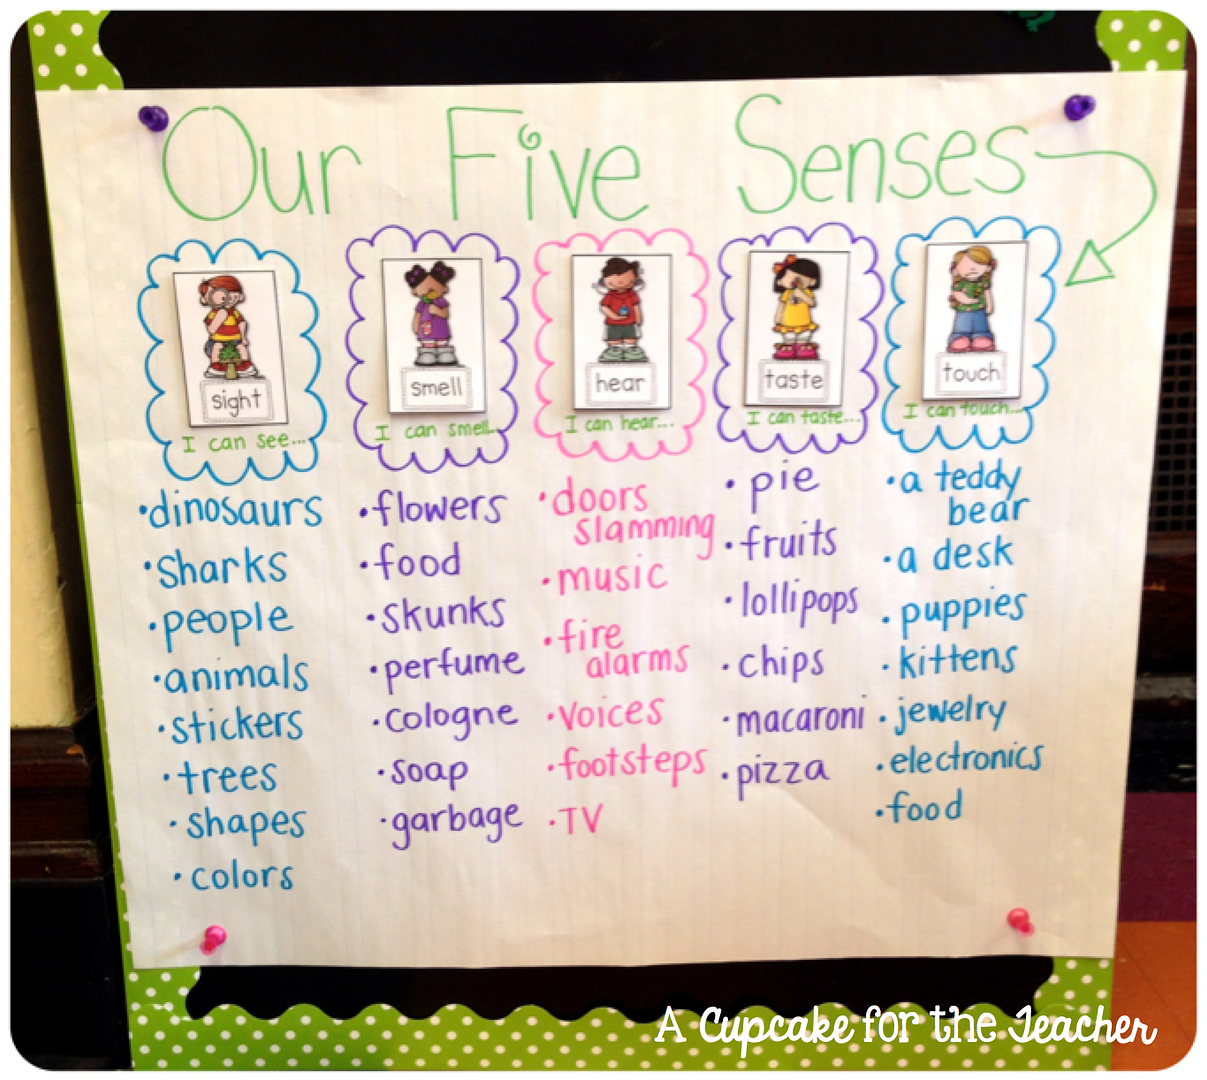 And last but not least on this anchor chart review… a little apple fun: